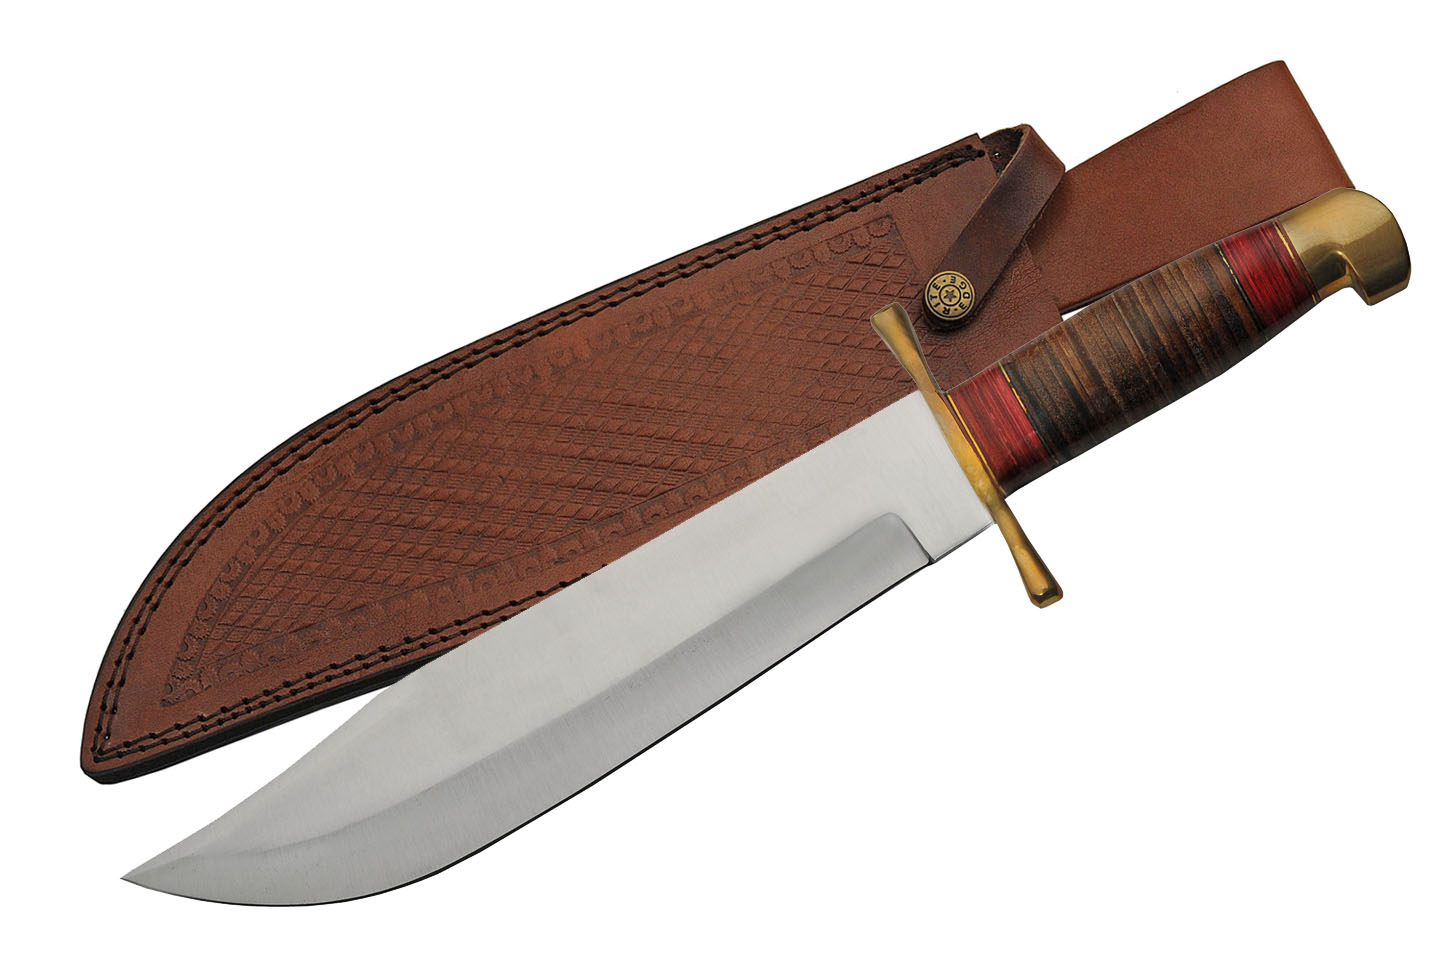 Bowie Knife 17in. Overall Leather Handle Stainless Blade Brass Guard + Sheath